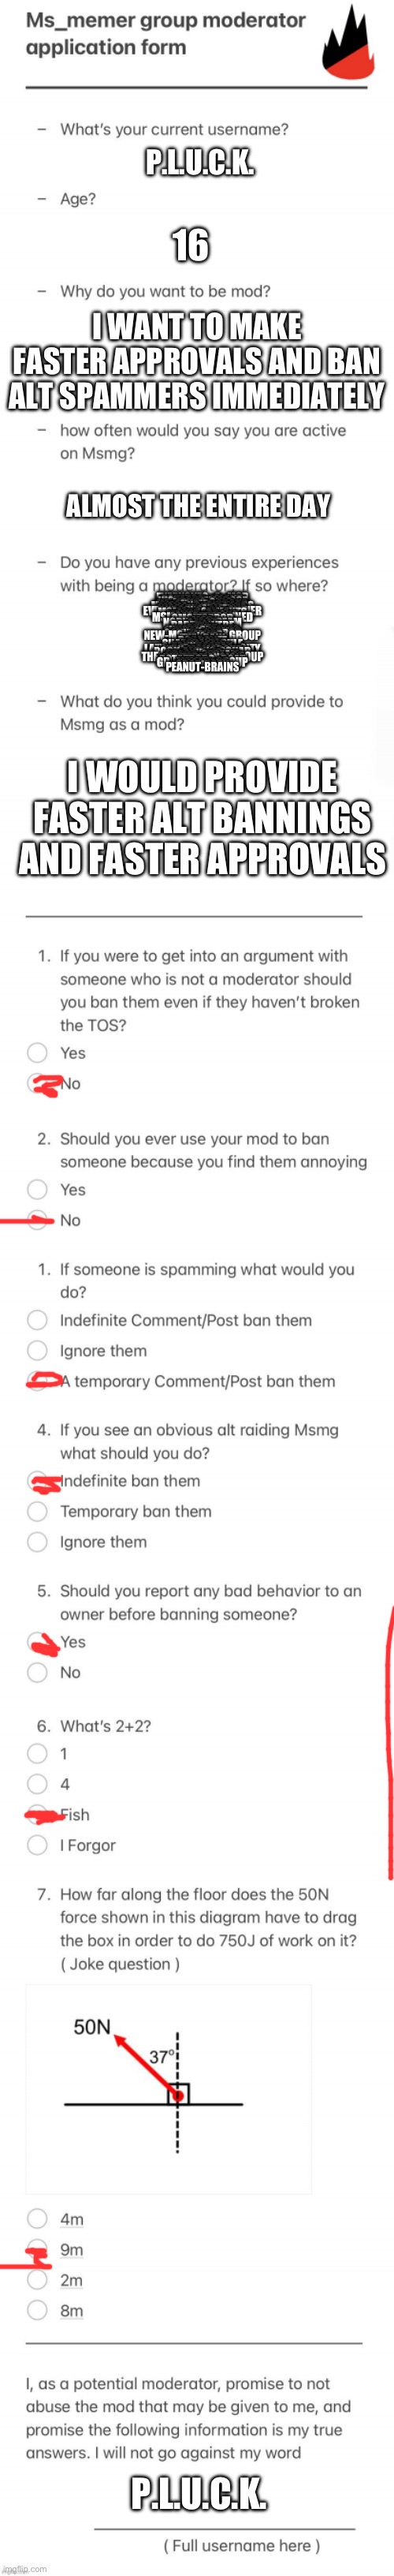 UPDATED MSMG MOD FORM | P.L.U.C.K. 16; I WANT TO MAKE FASTER APPROVALS AND BAN ALT SPAMMERS IMMEDIATELY; ALMOST THE ENTIRE DAY; EVERYONES_A_MOD
POTATOS_ISLAND
JUSTACHEEMSDOGE
MEMES-OHIO
VA_MEMER_GROUP
MSMG_NO_SITEMODS
MSMG_SHITPOSTS
WORLDWARMEMES
EVERYBODYS_AN_OWNER
MSMG_COMMENTS
CULT_OF_E
MEMER_GROUP
MSMGFORTHEBANNED
OMGITSPROD
MOD
NORULESSTREAM
SAUCE
DARTHSWEDE
FFA
SILVER
WHATARERULES
I_ENJOY_MEMES
SOVIET_CARROT
NEW-MS_MEMER_GROUP
FLICK7
THE_RAIN
BORA4LIFE
PLUCK
SHAREDALTSRULE
IMGLEAK
FOUNDSATAN
LAZY_RED_PANDAS_CITY
NEW-MSMGROUP
ROCK-EATING-SQUAD
GNIB_JR
SPACE_STREAM
THE_MEMER_HELL_GROUP
HUNTEDMANSION
POTATBOBS_BOAT
GD_MEMER_GROUP
EMOSNAKE
3DSPIRACY
PEANUT-BRAINS; I WOULD PROVIDE FASTER ALT BANNINGS AND FASTER APPROVALS; P.L.U.C.K. | image tagged in updated msmg mod form | made w/ Imgflip meme maker